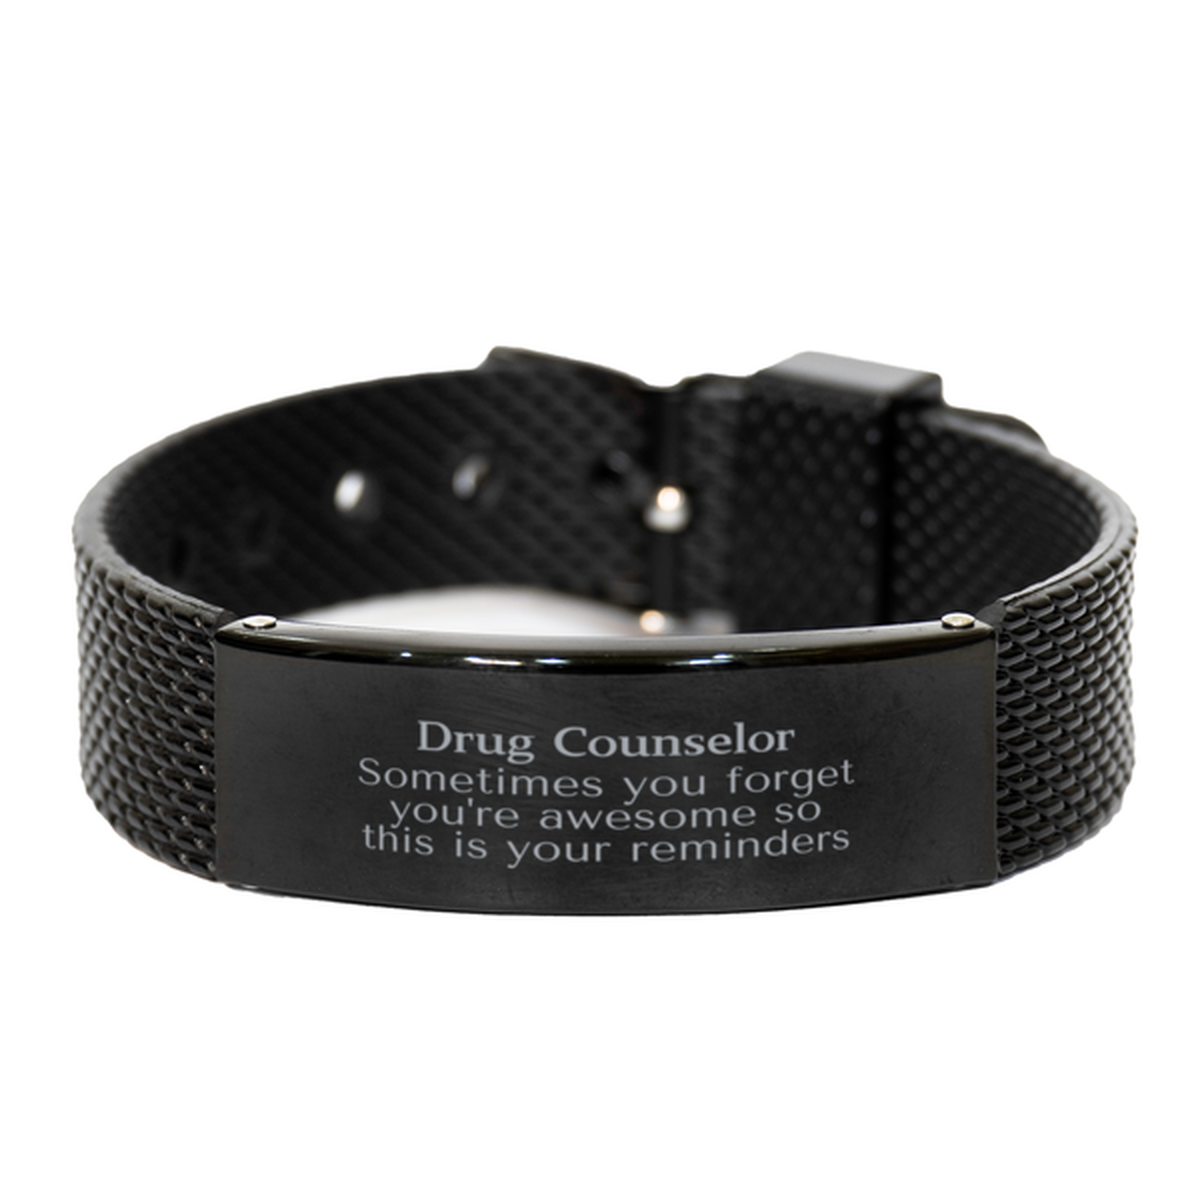 Sentimental Drug Counselor Black Shark Mesh Bracelet, Drug Counselor Sometimes you forget you're awesome so this is your reminders, Graduation Christmas Birthday Gifts for Drug Counselor, Men, Women, Coworkers